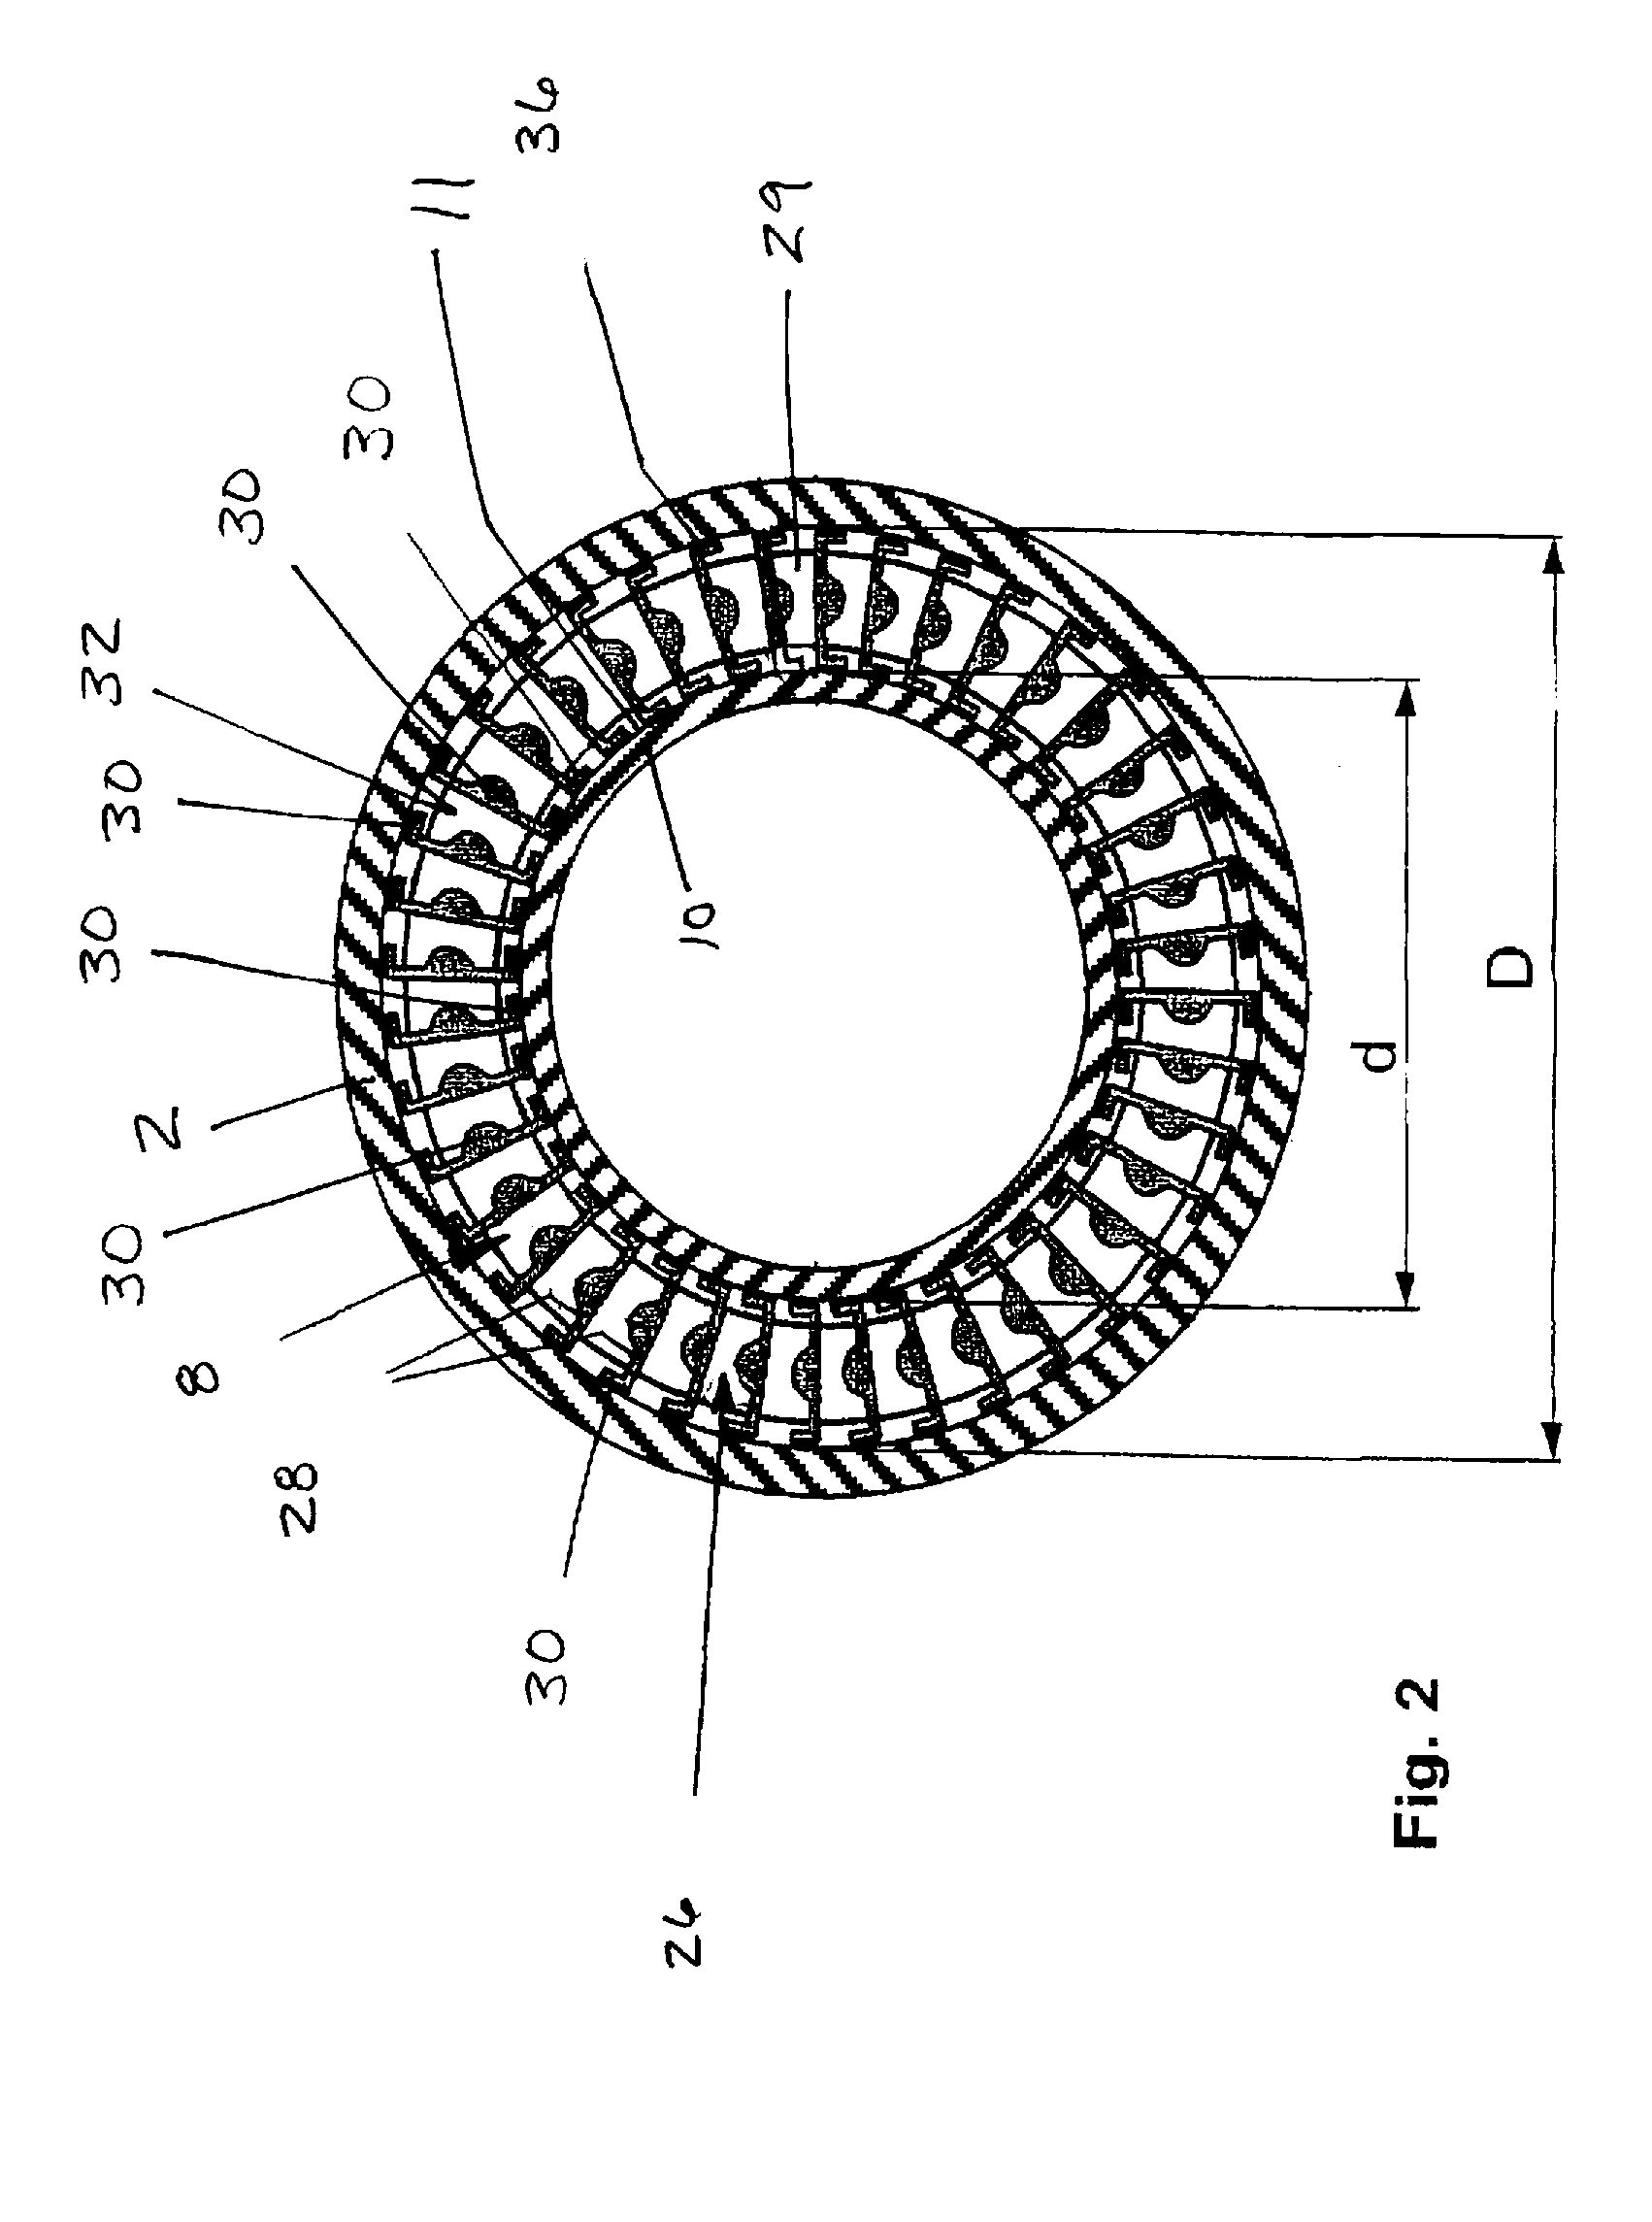 Internal heat exchanger with calibrated coil-shaped fin tube